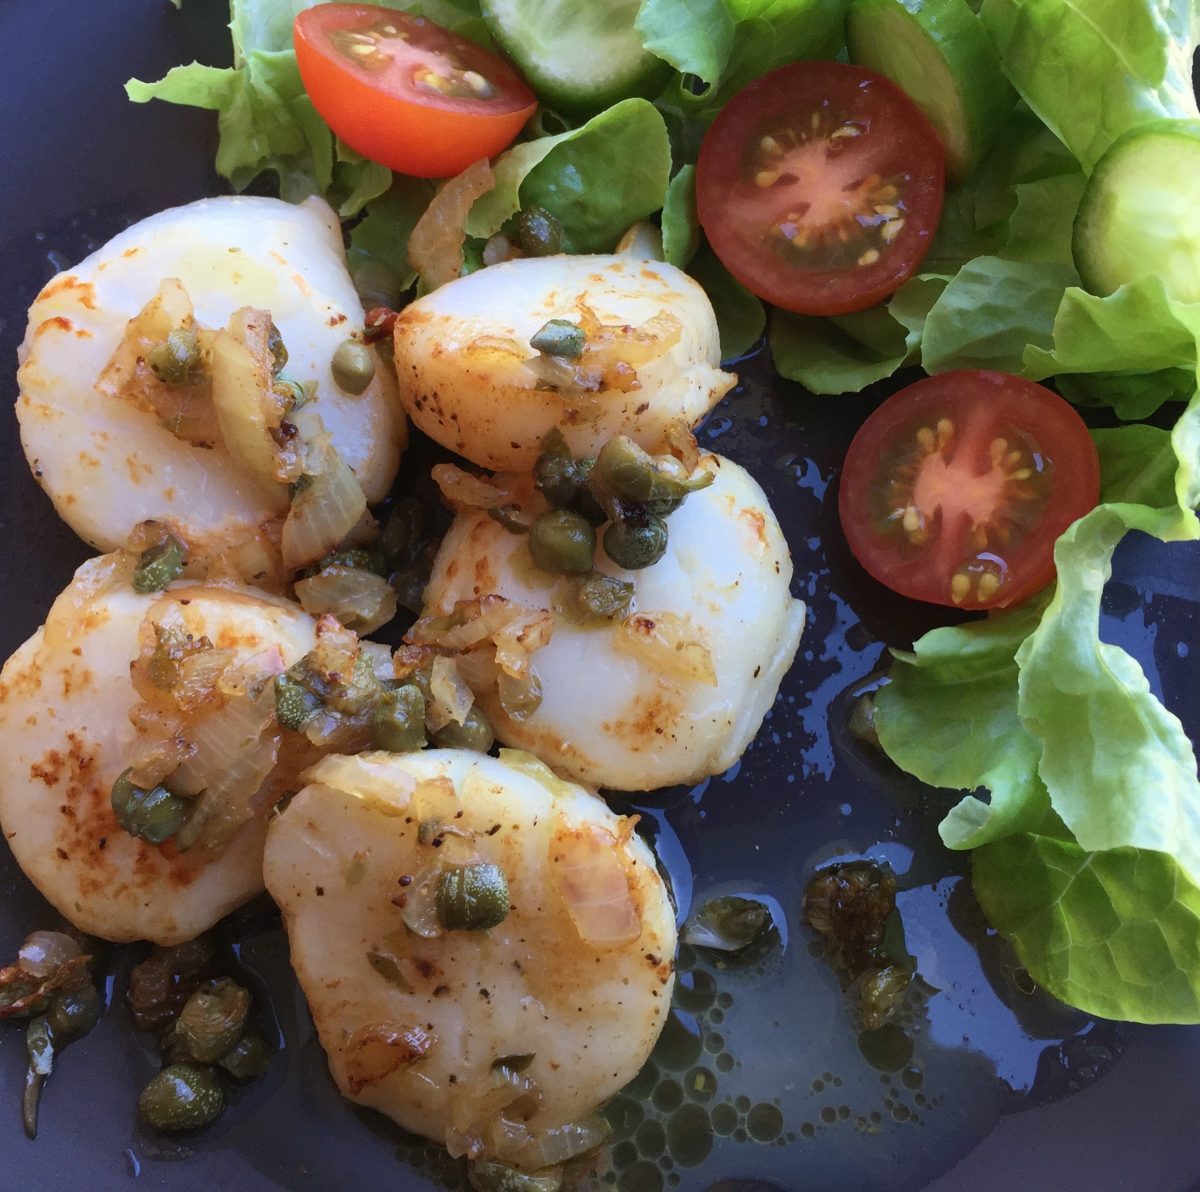 Lemon Chilli Scallops with Capers by cooking meals for one